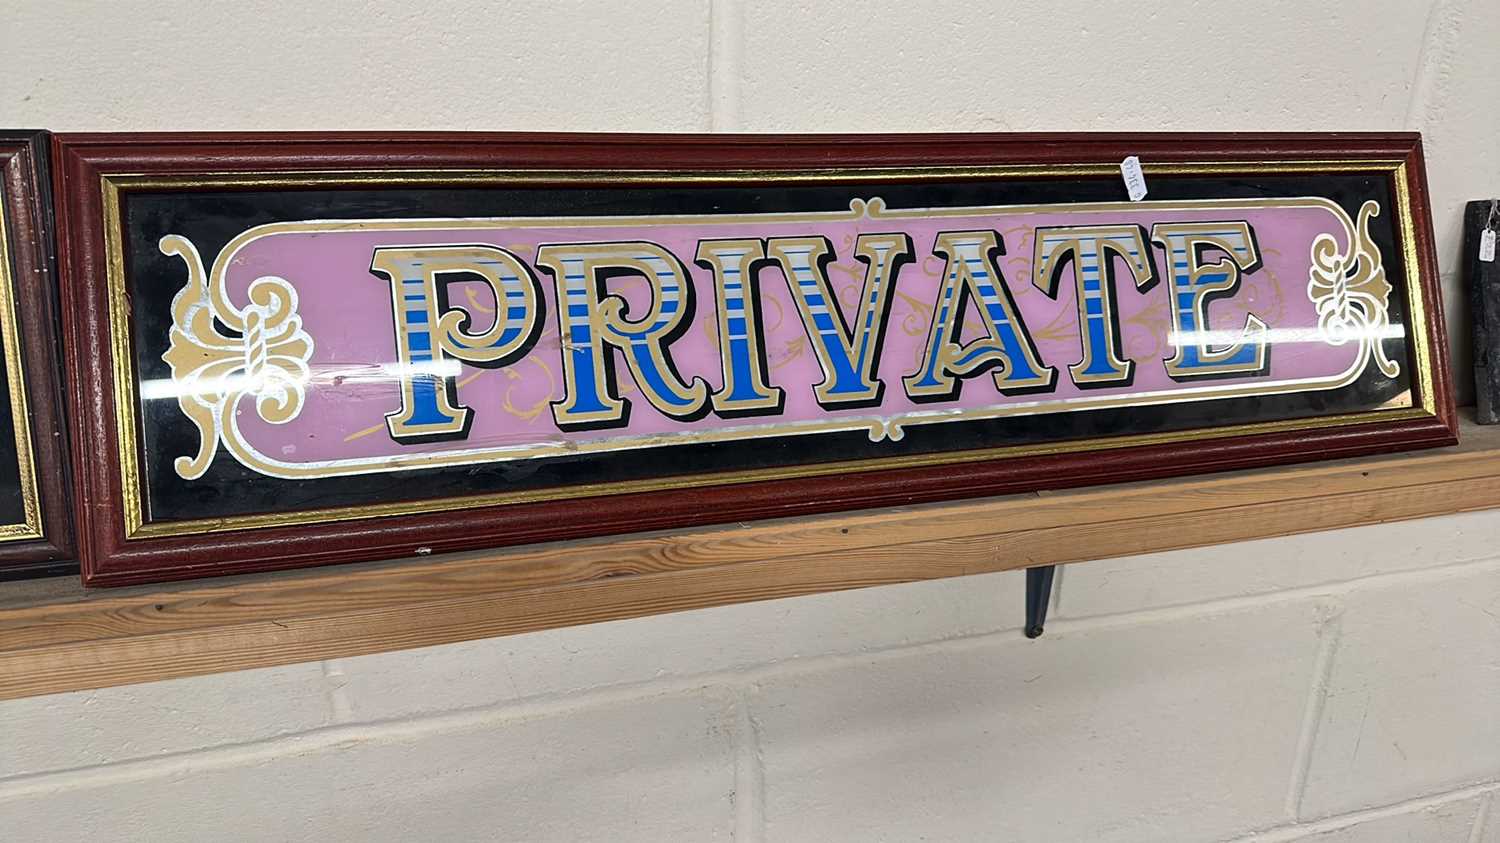 Two mirrored pub signs "No Smoking" and "Private", both framed - Image 3 of 4